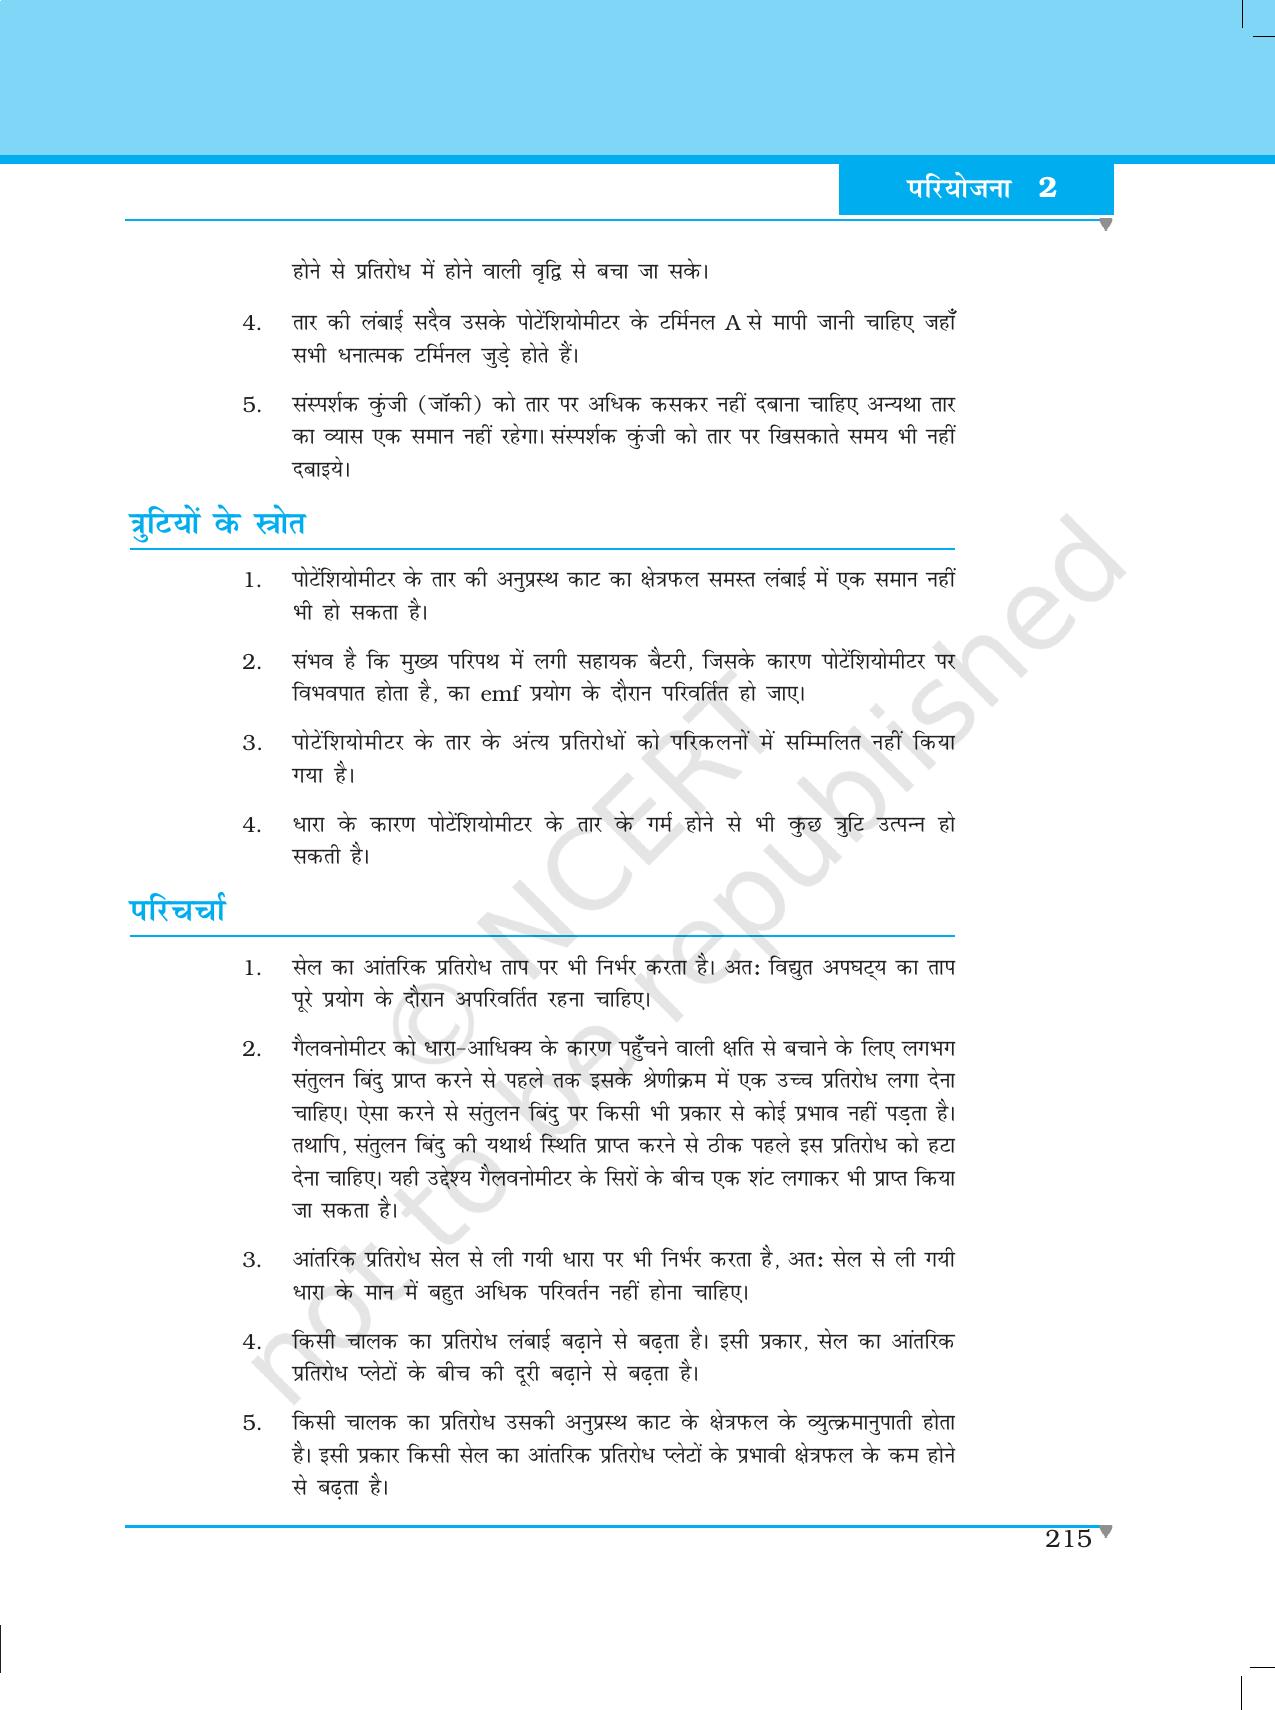 NCERT Laboratory Manuals for Class XII भौतिकी - परियोजना (1 - 7) - Page 9